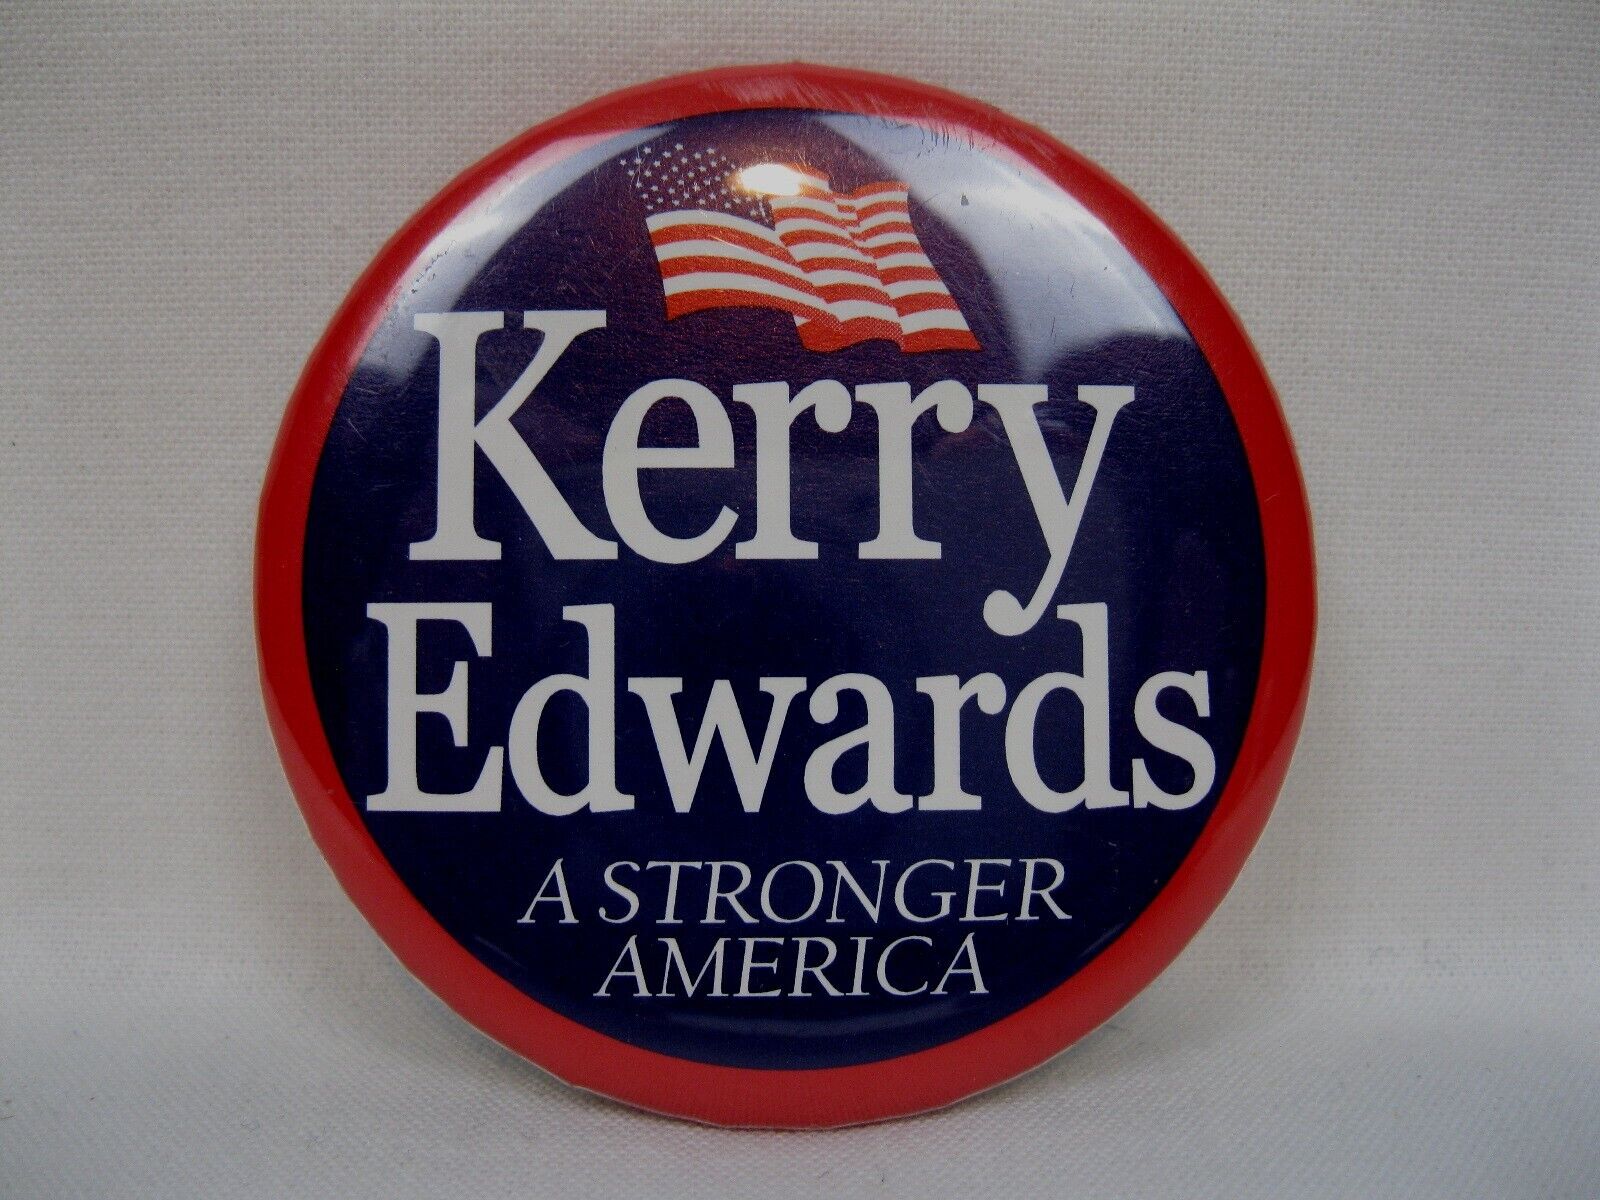 2004 Kerry Edwards Presidential Campaign Button Pin Stronger America 2 Available